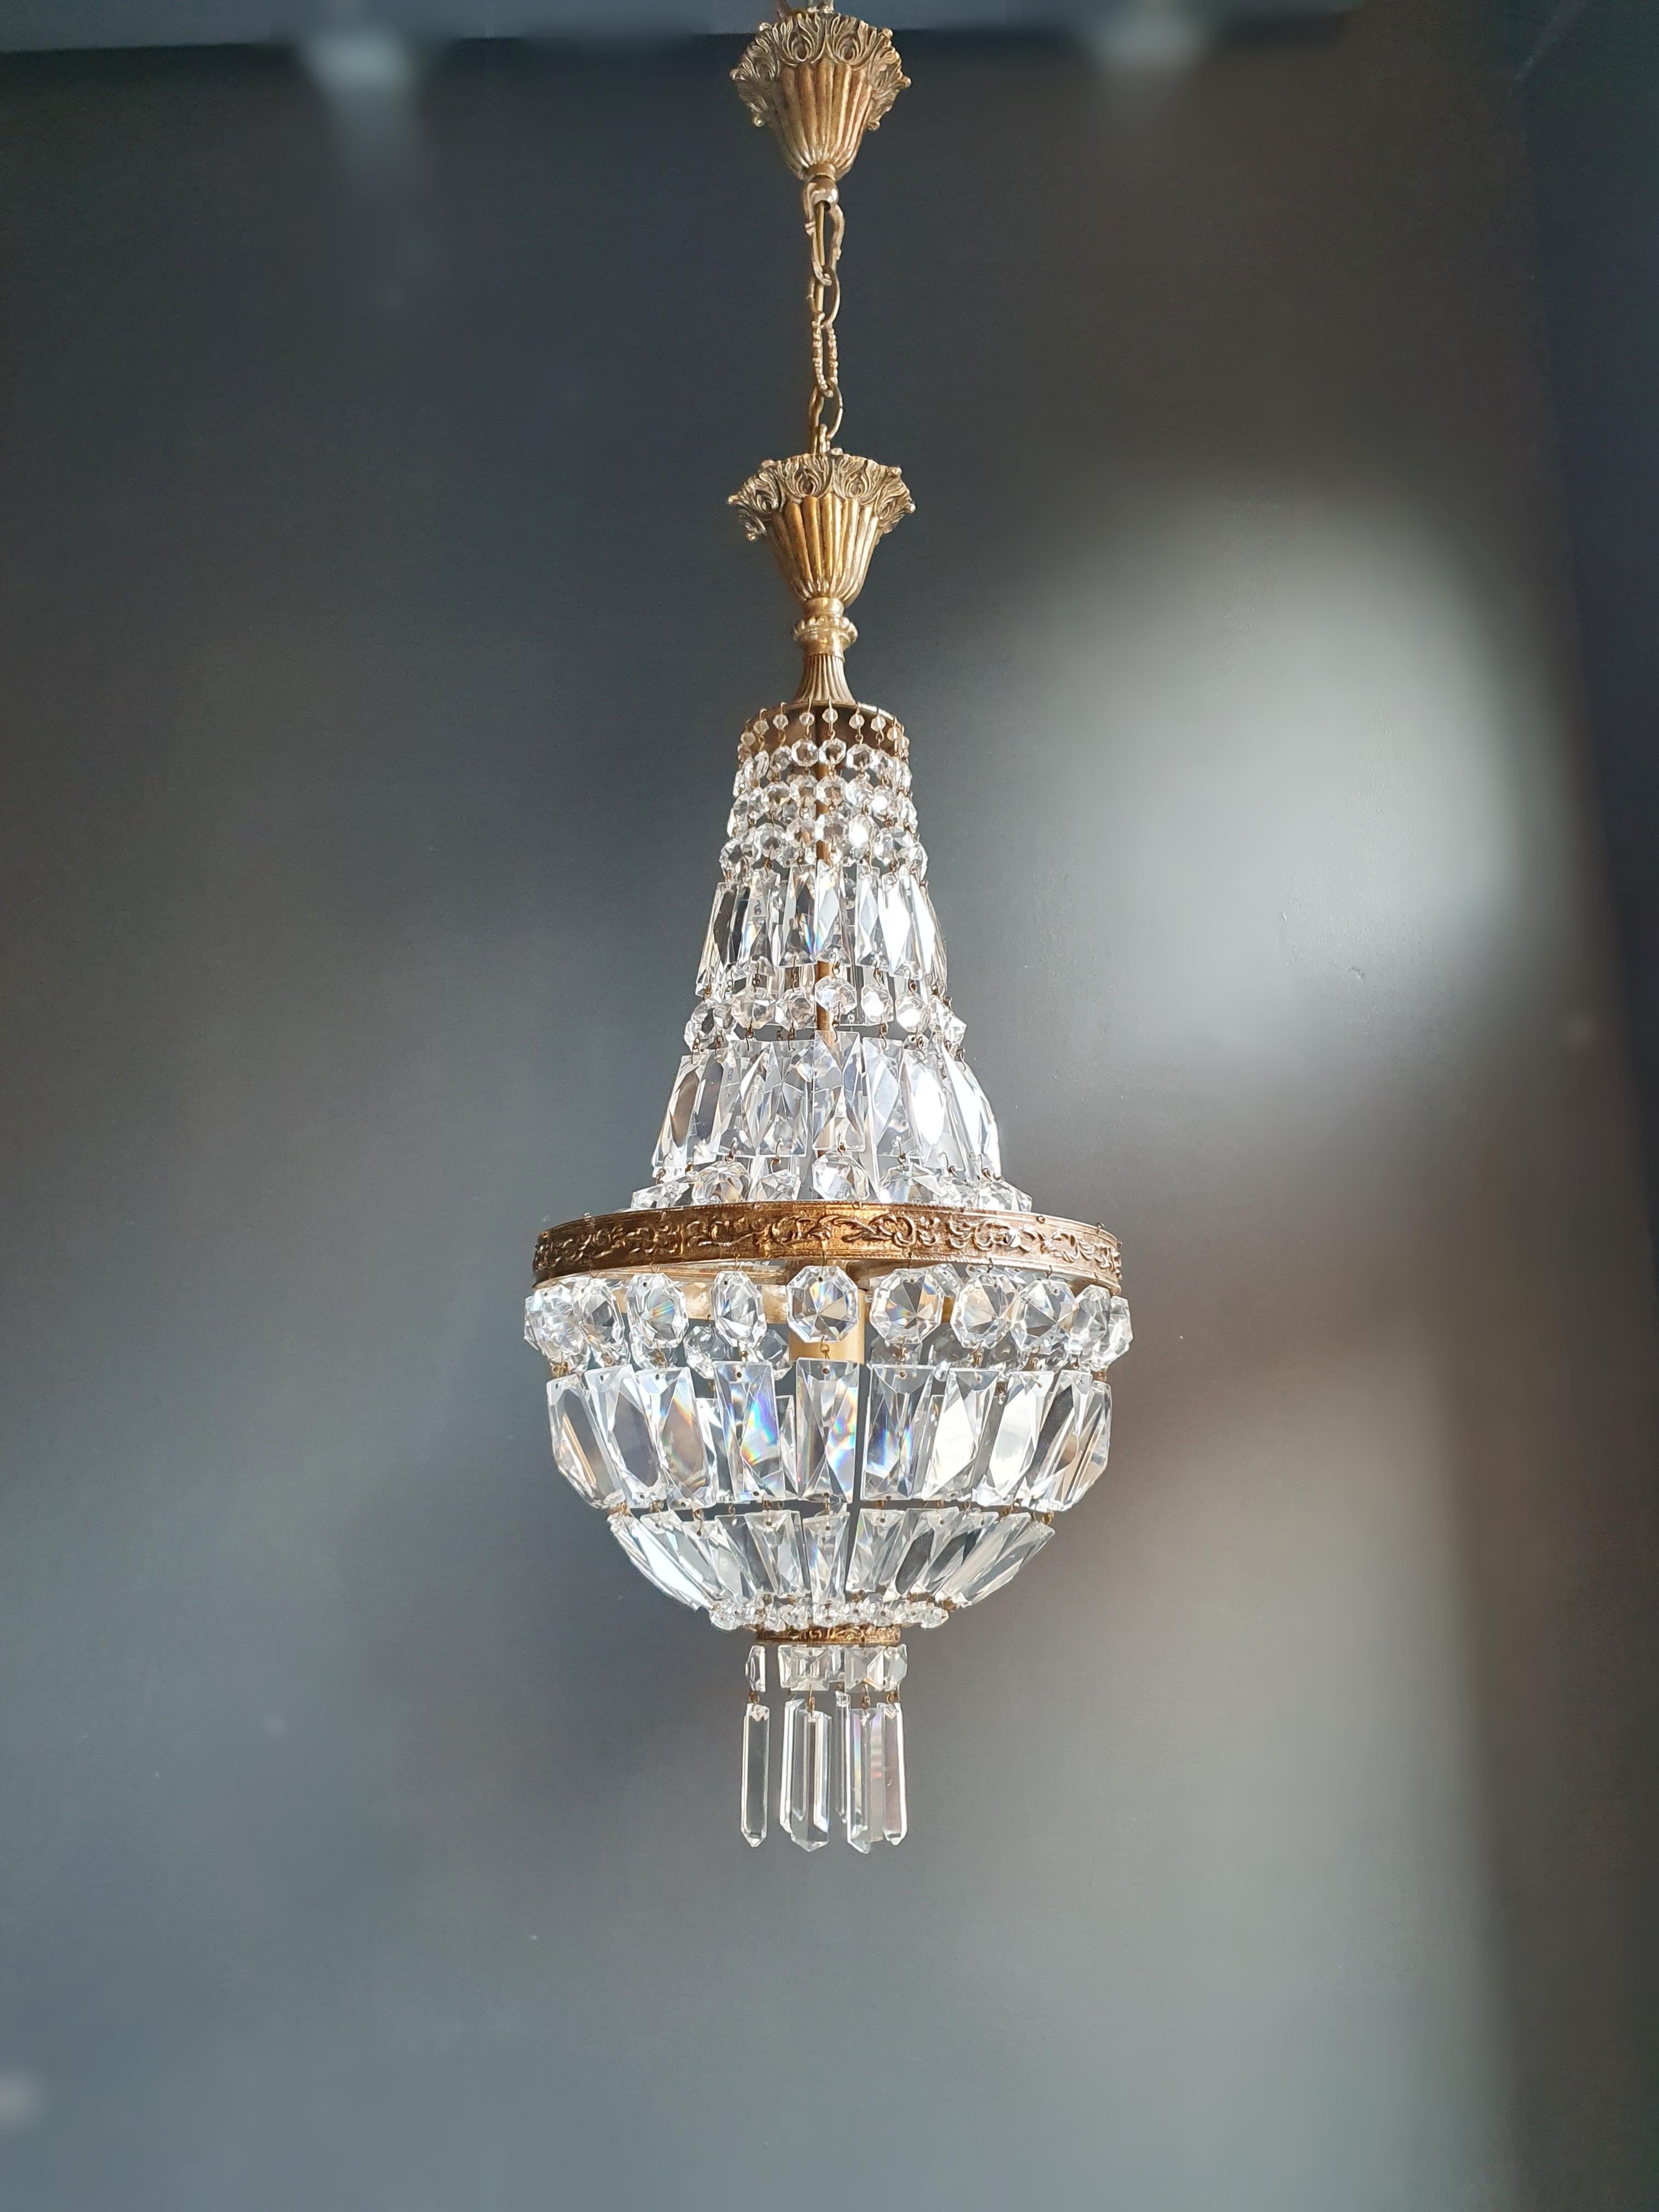 Cabling and sockets completely renewed. Crystal hand knotted
Measures: Total height 90 cm, height without chain 70cm, diameter 30 cm, weight (approximately) 6 kg.

Number of lights: One-light bulb sockets: E27

Fine brass Empire Sac a pearl